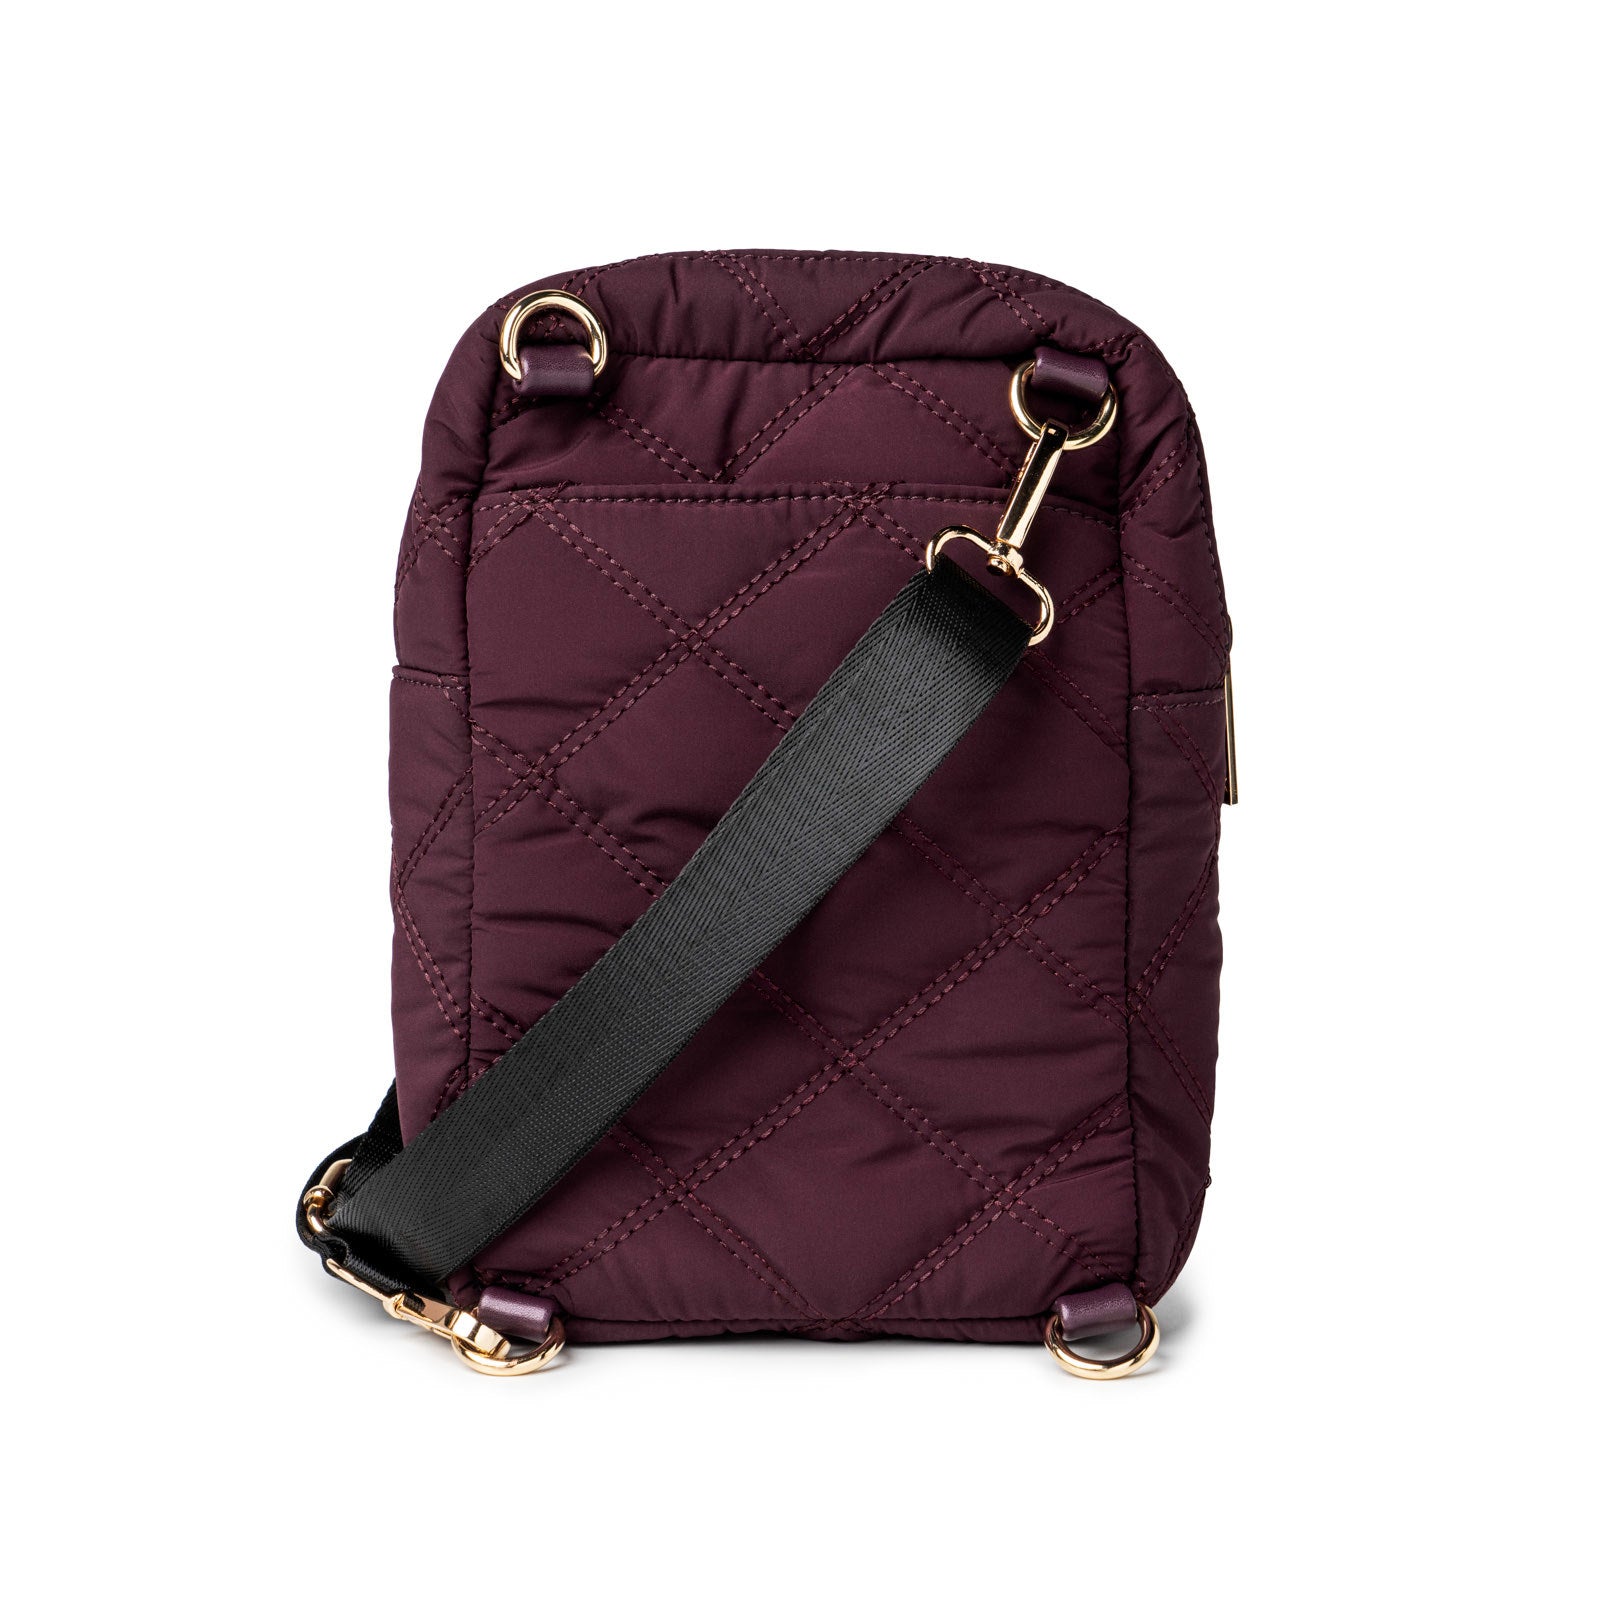 Mulberry Cloud 9 Convertible Sling